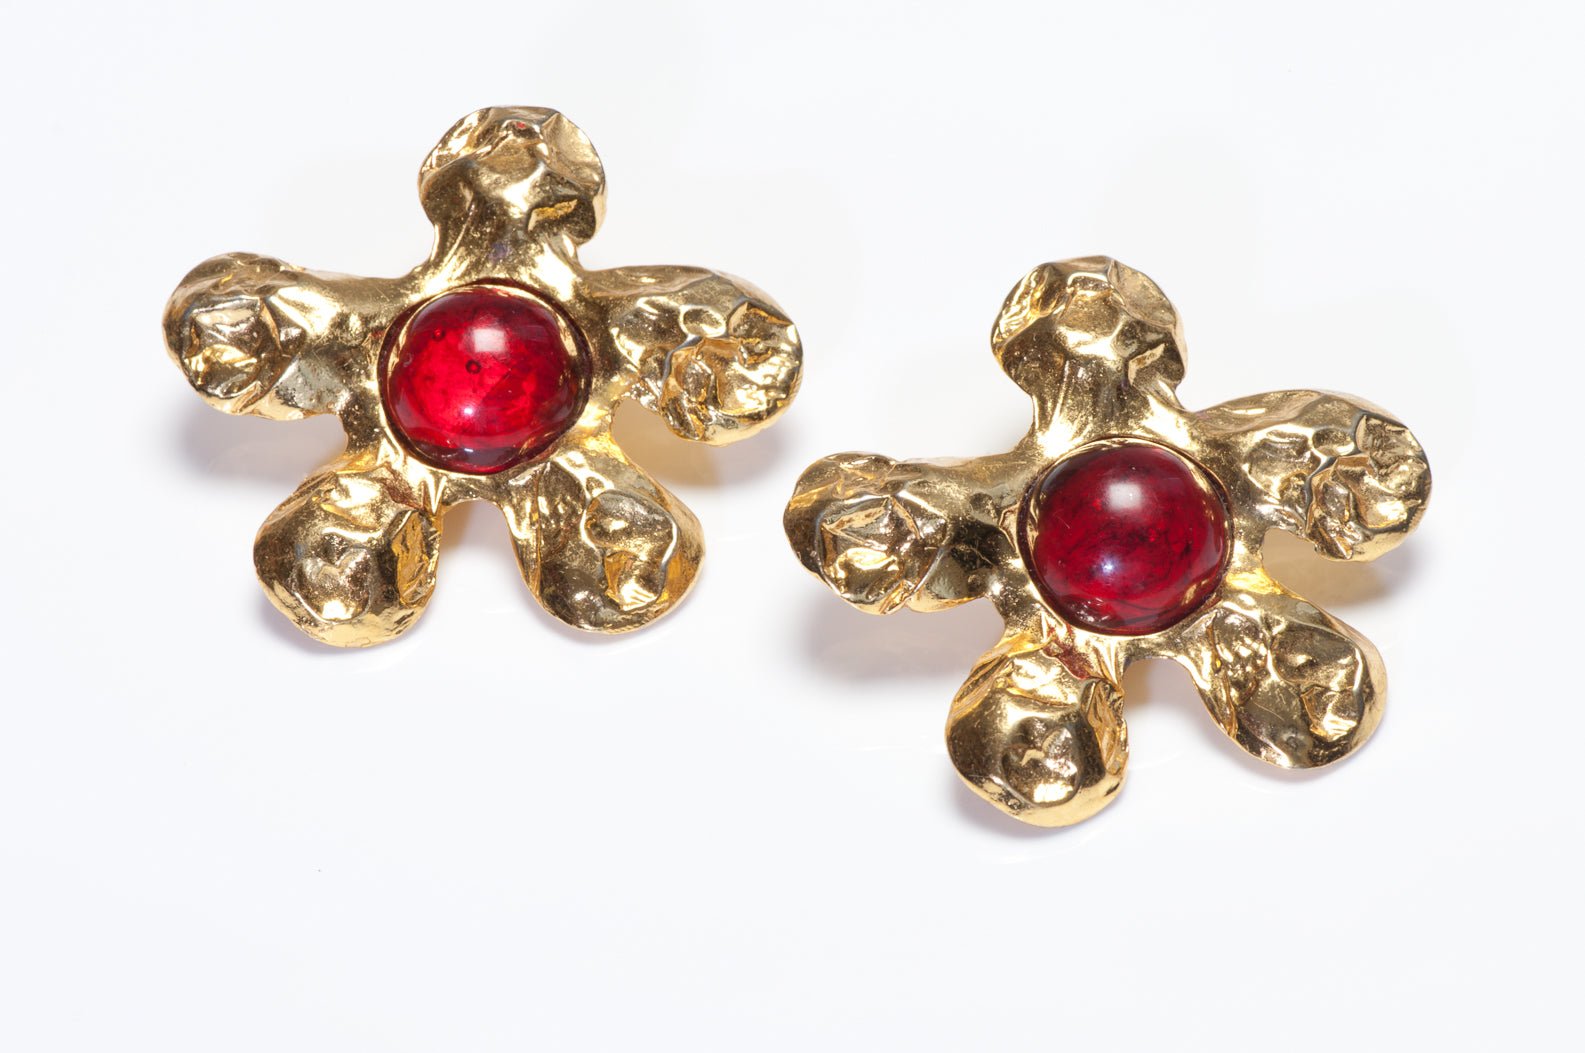 Vintage 1980’s Edouard Rambaud Paris Gold Plated Red Cabochon Flower Earrings